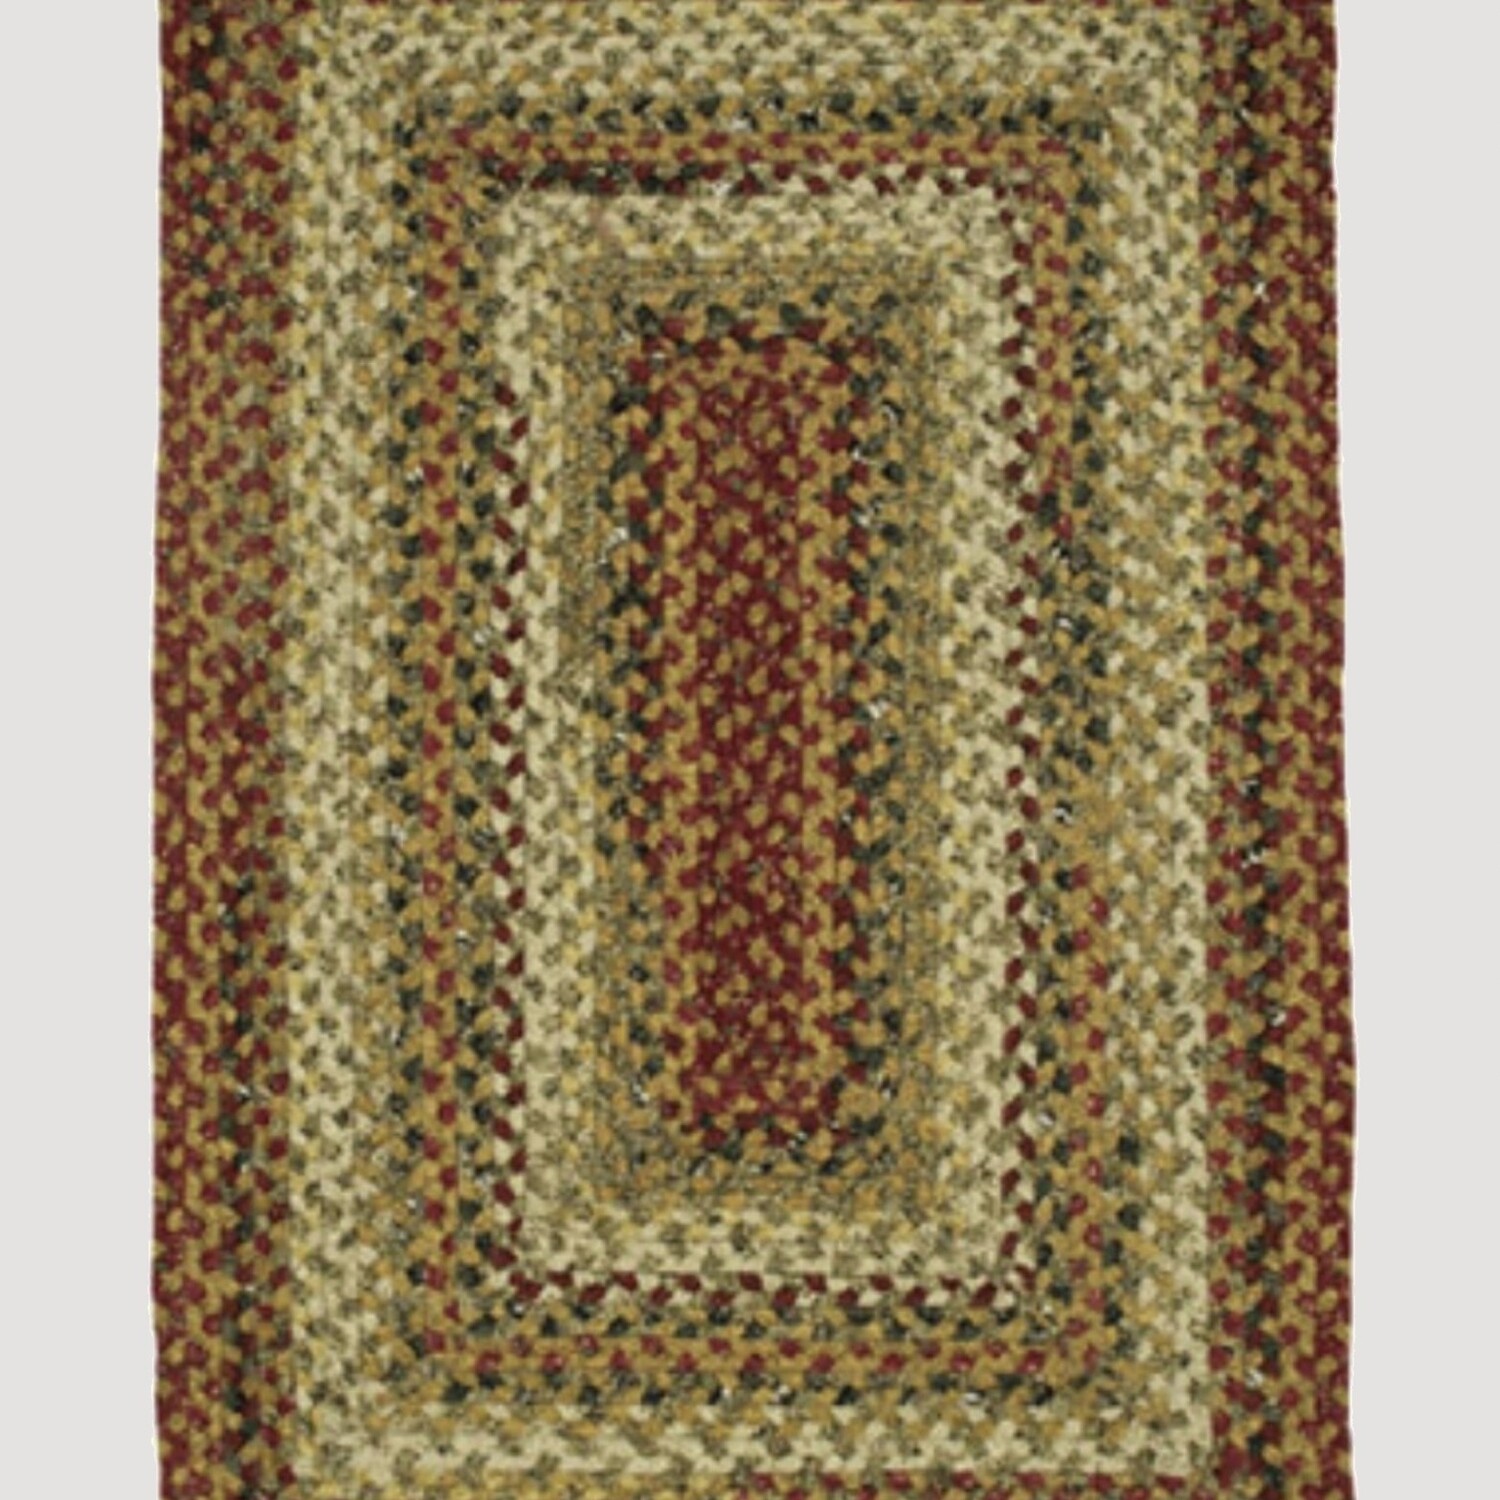 Homespice Cotton Braided Rugs